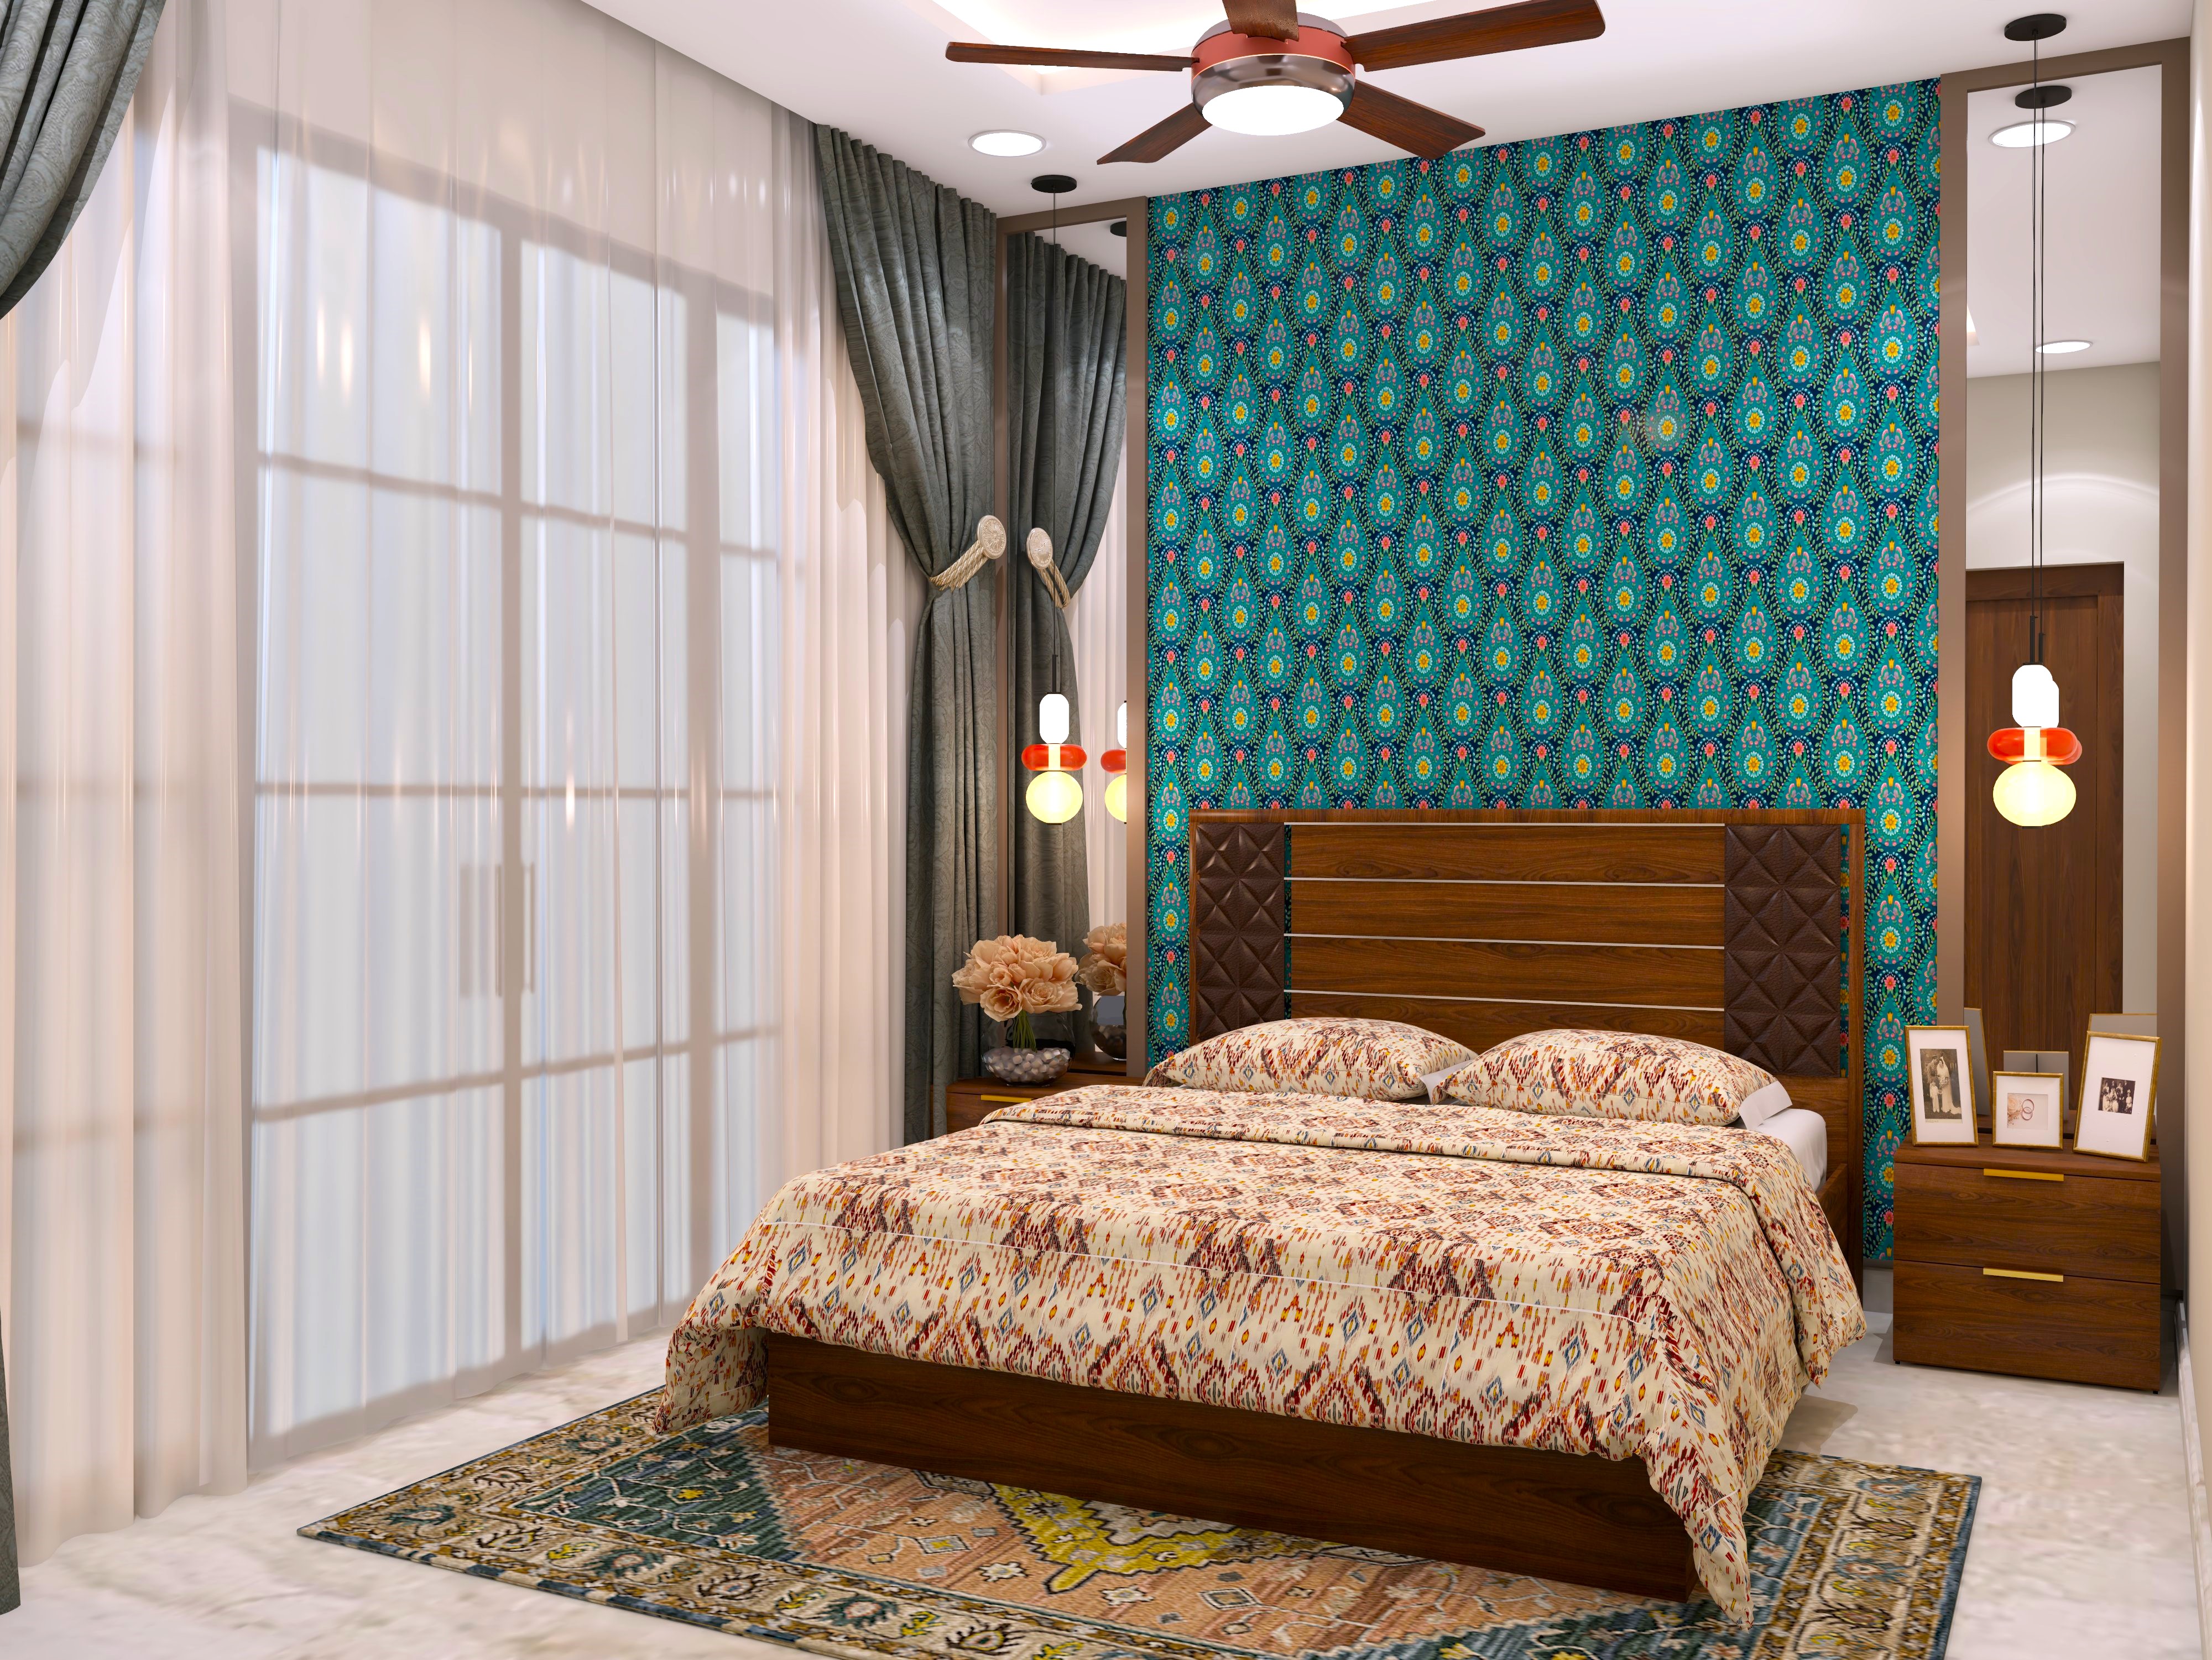 Traditional style guest bedroom with printed wallpaper and rug - Beautiful Homes